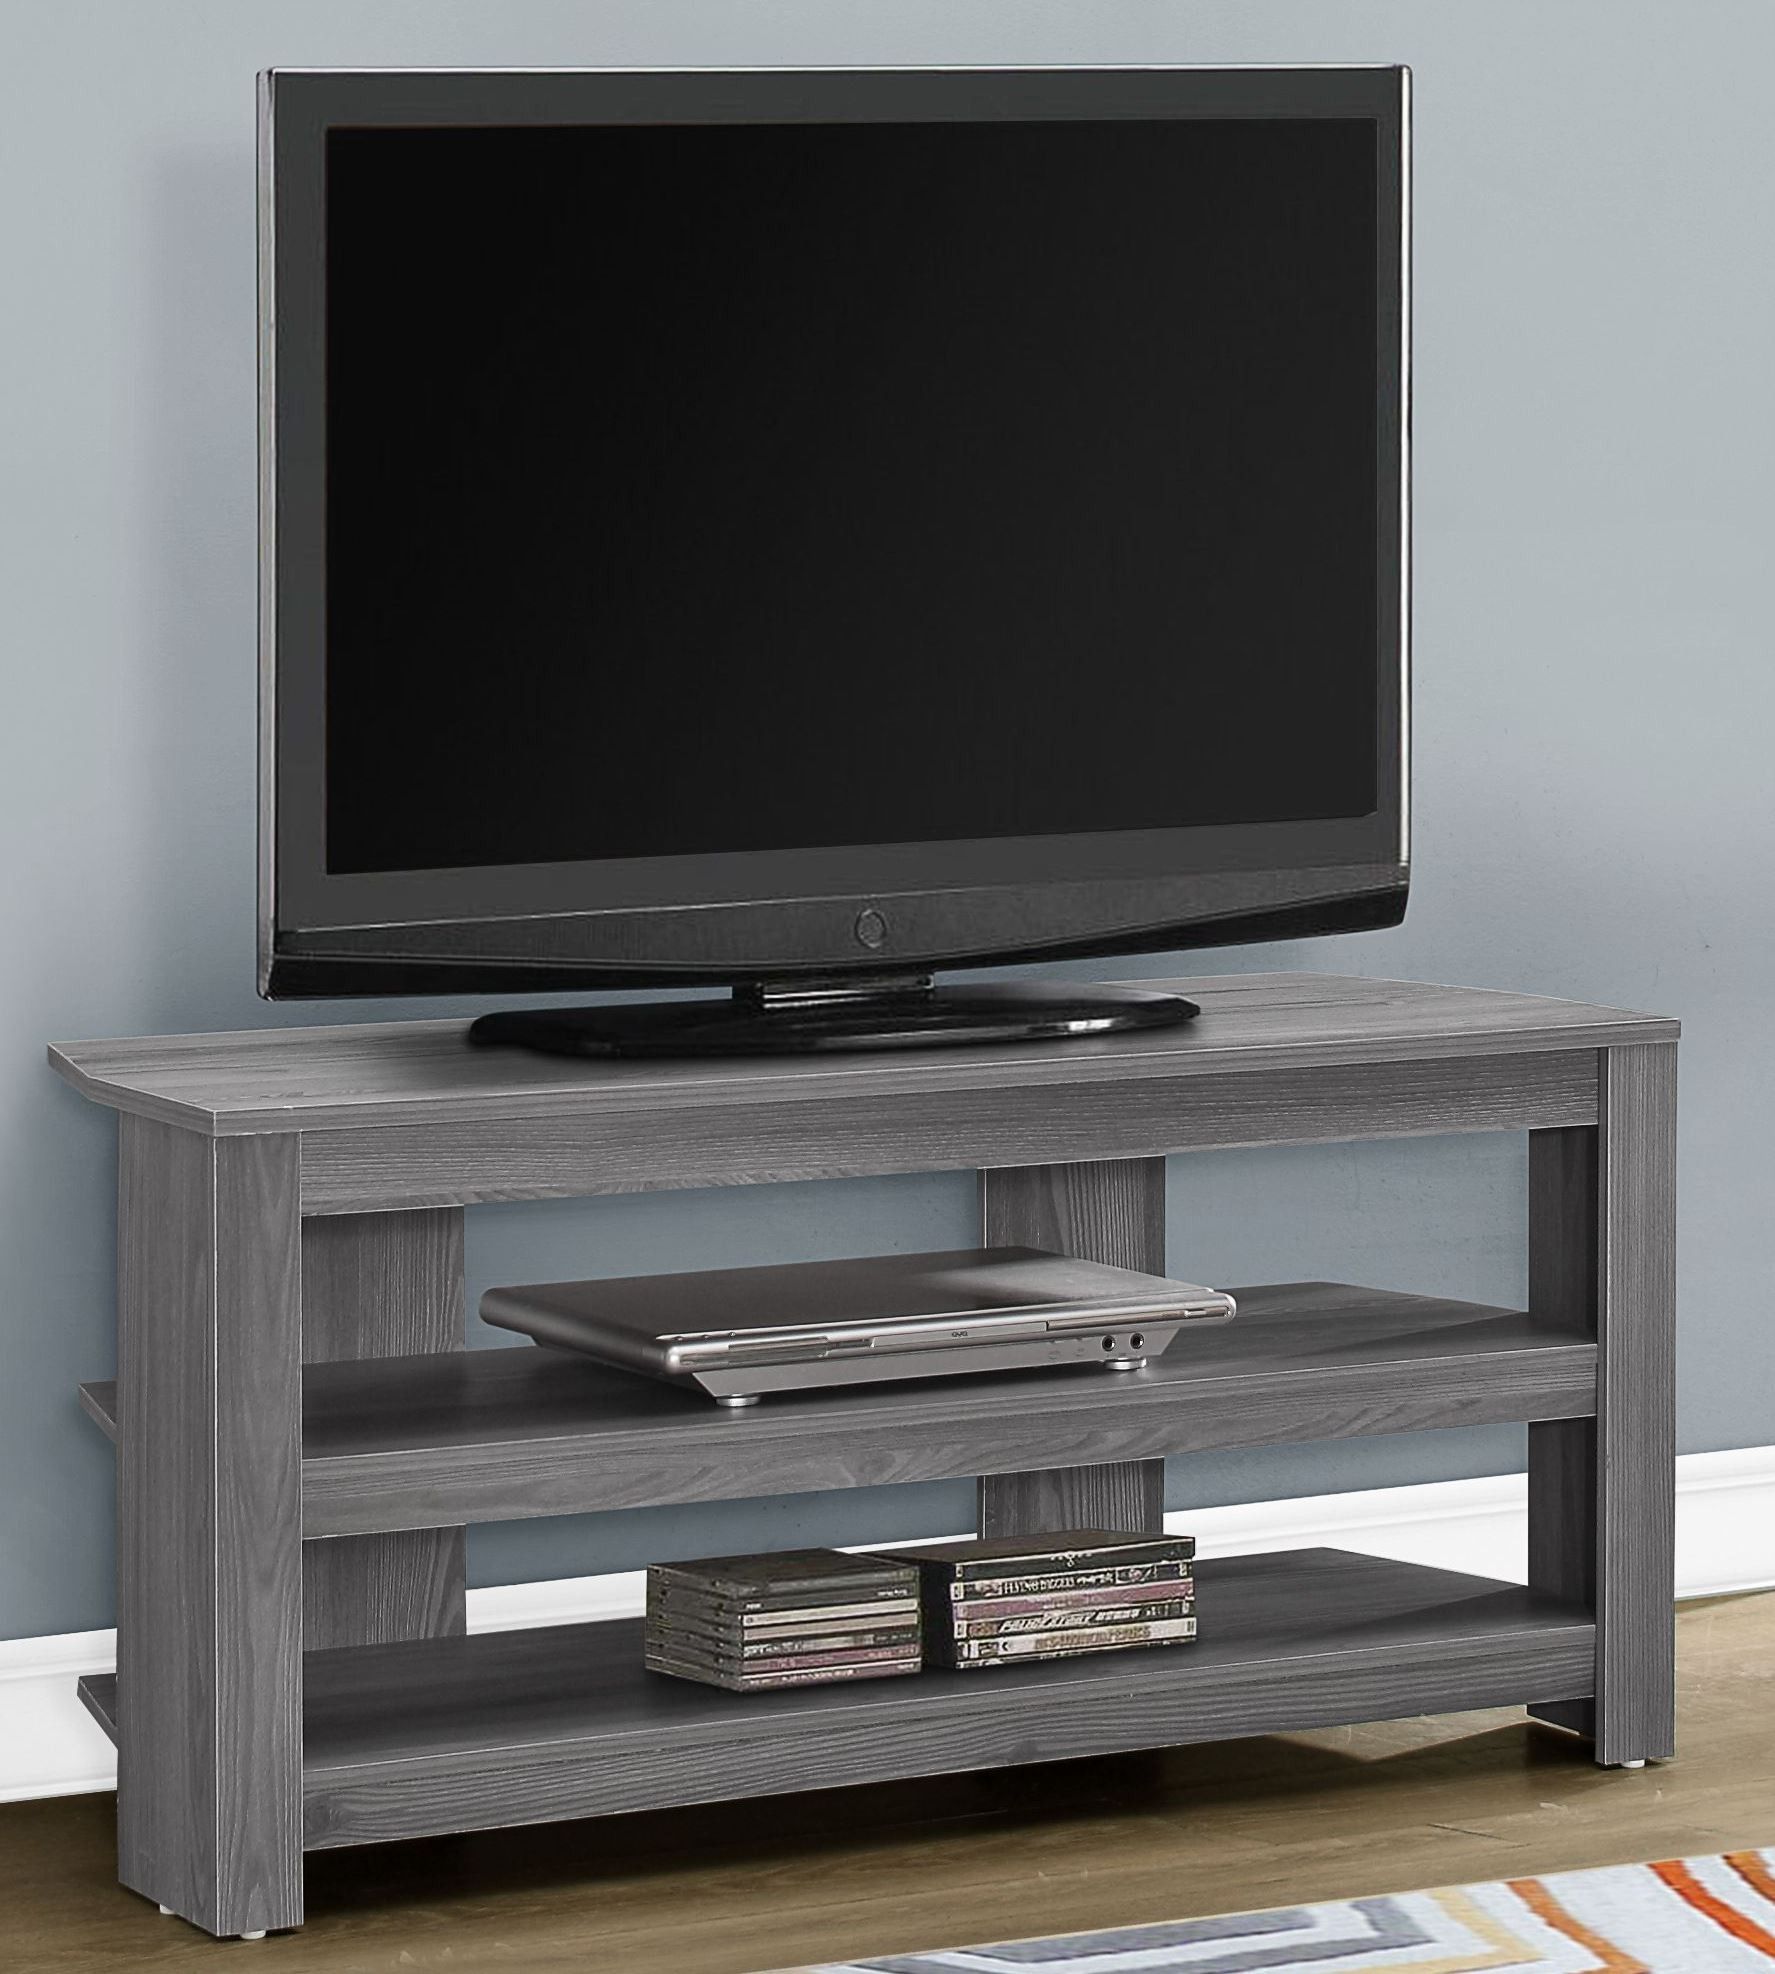 Gray 42" Corner Tv Stand From Monarch | Coleman Furniture In Orange Tv Stands (View 6 of 15)